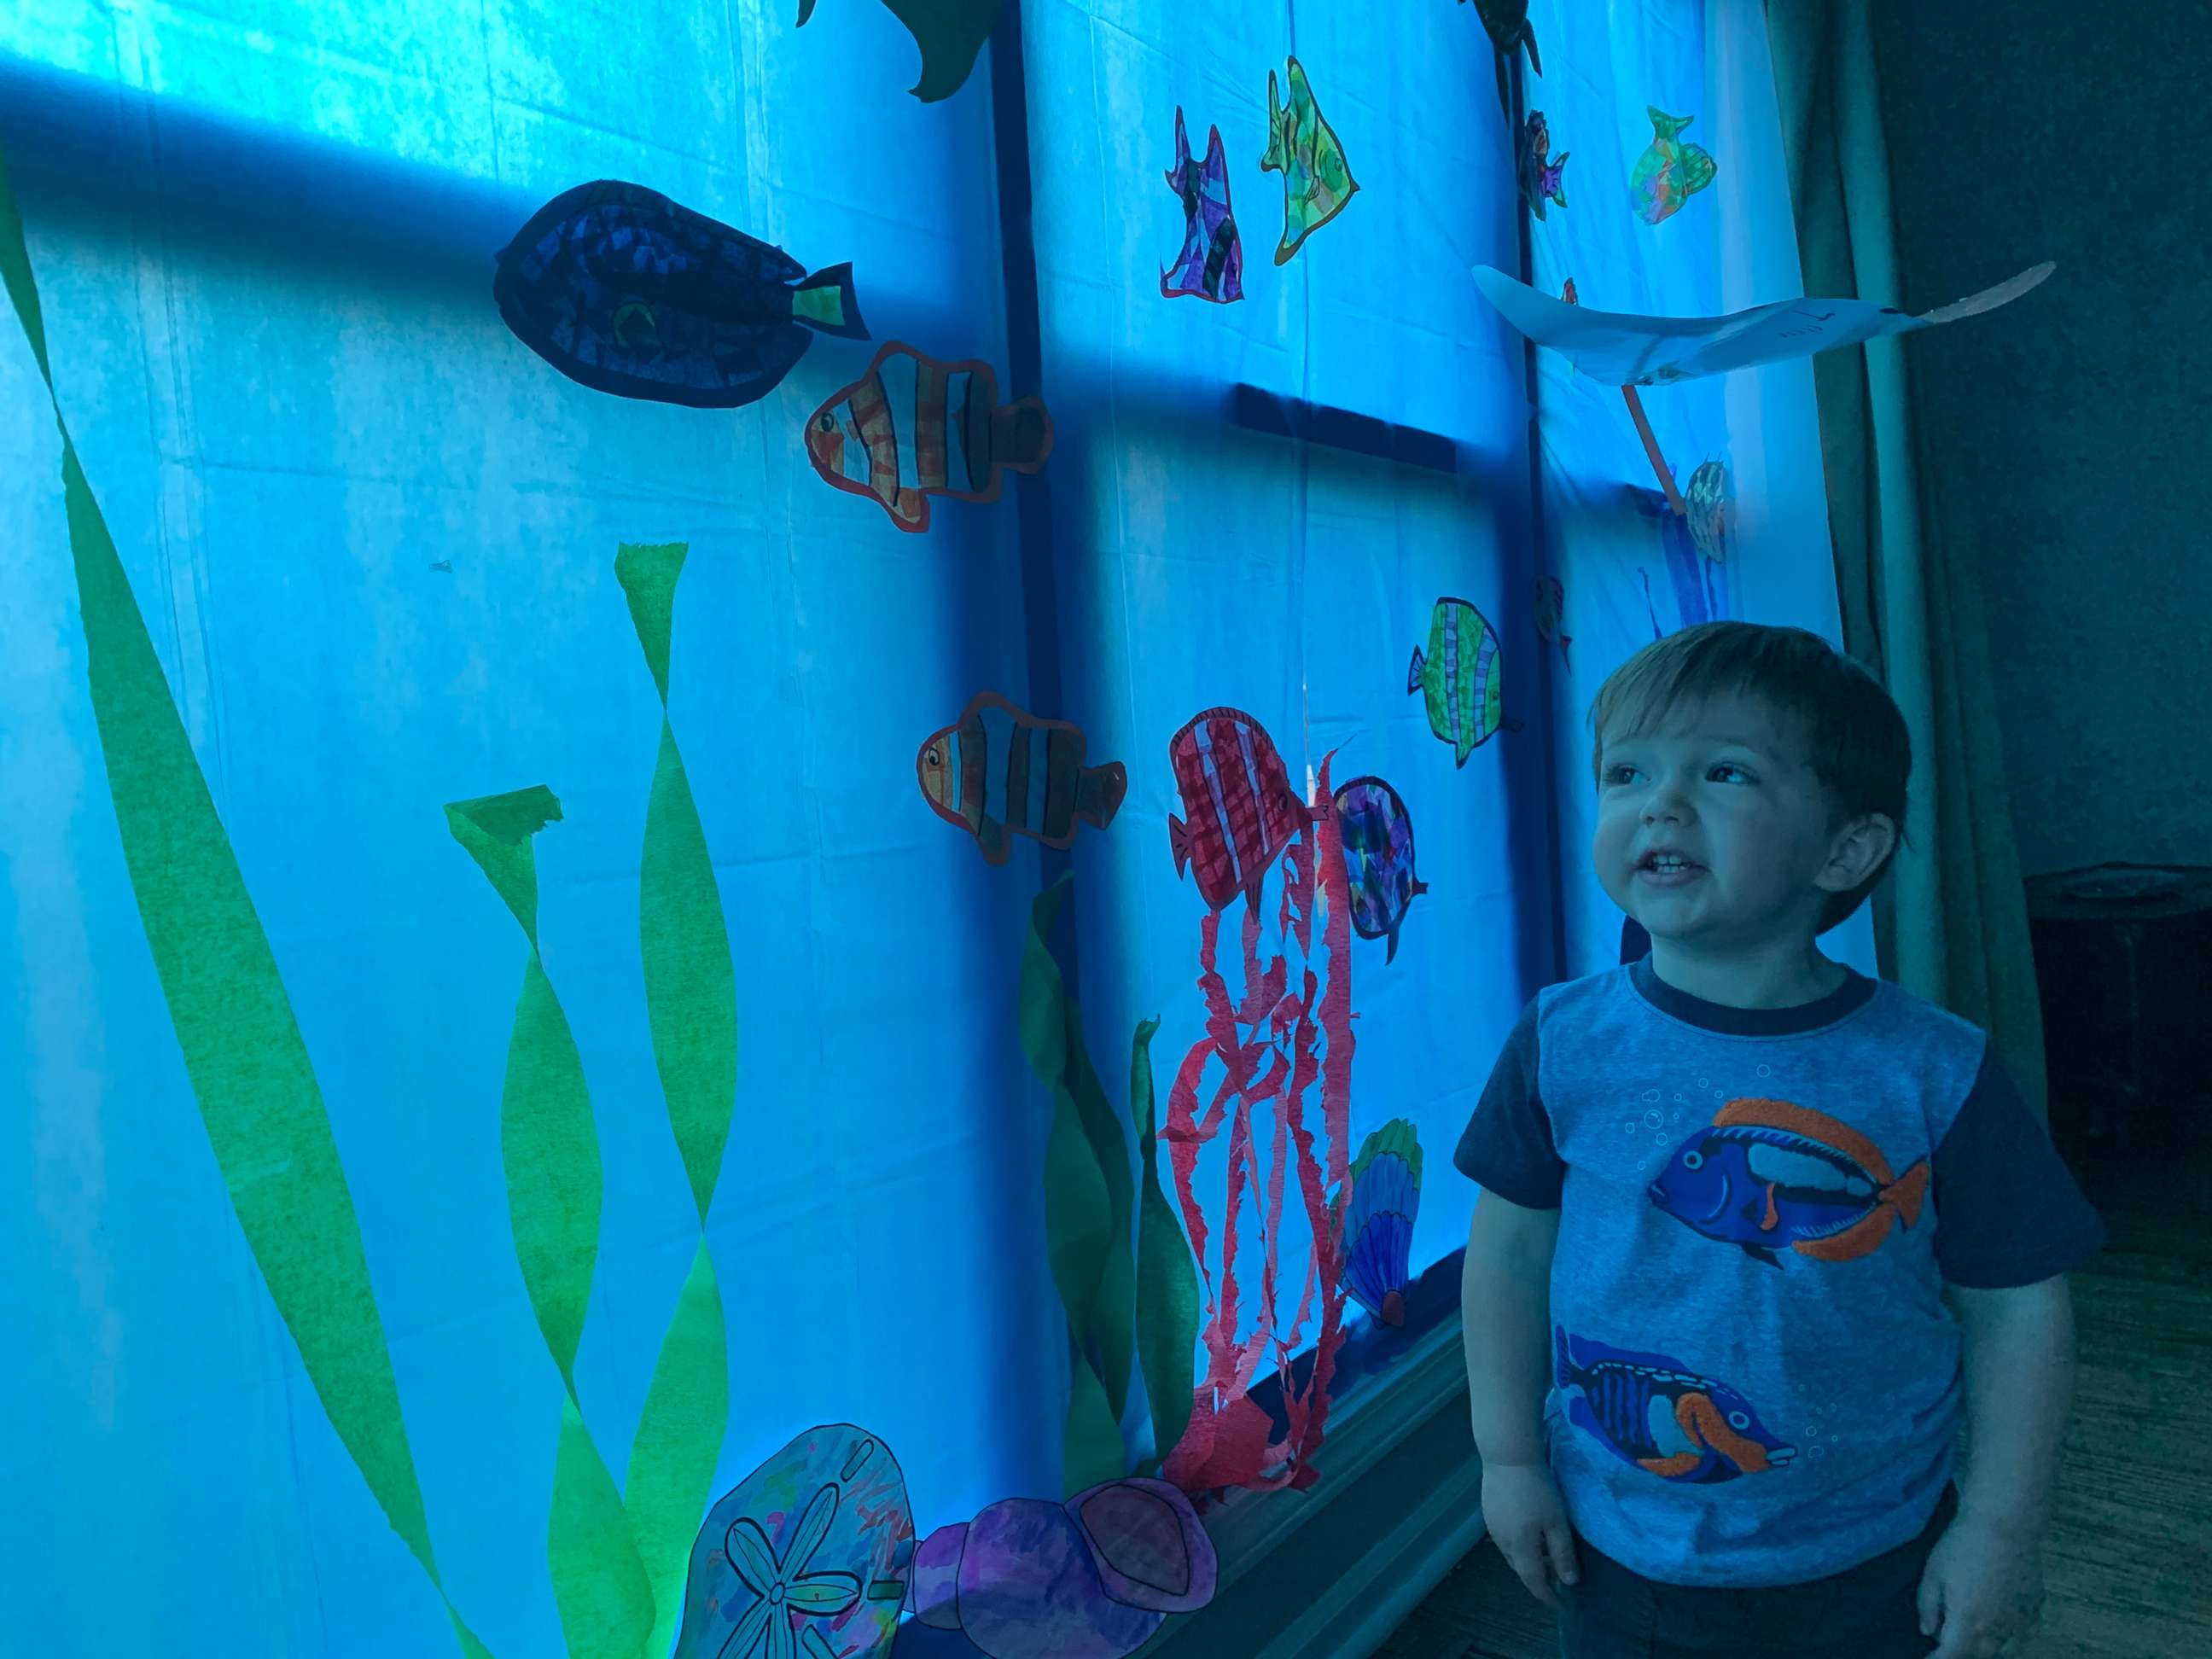 PHOTO: 2-year-old Clark takes in his new "aquarium" after mom Becky Spagnuolo transformed their house for his birthday.